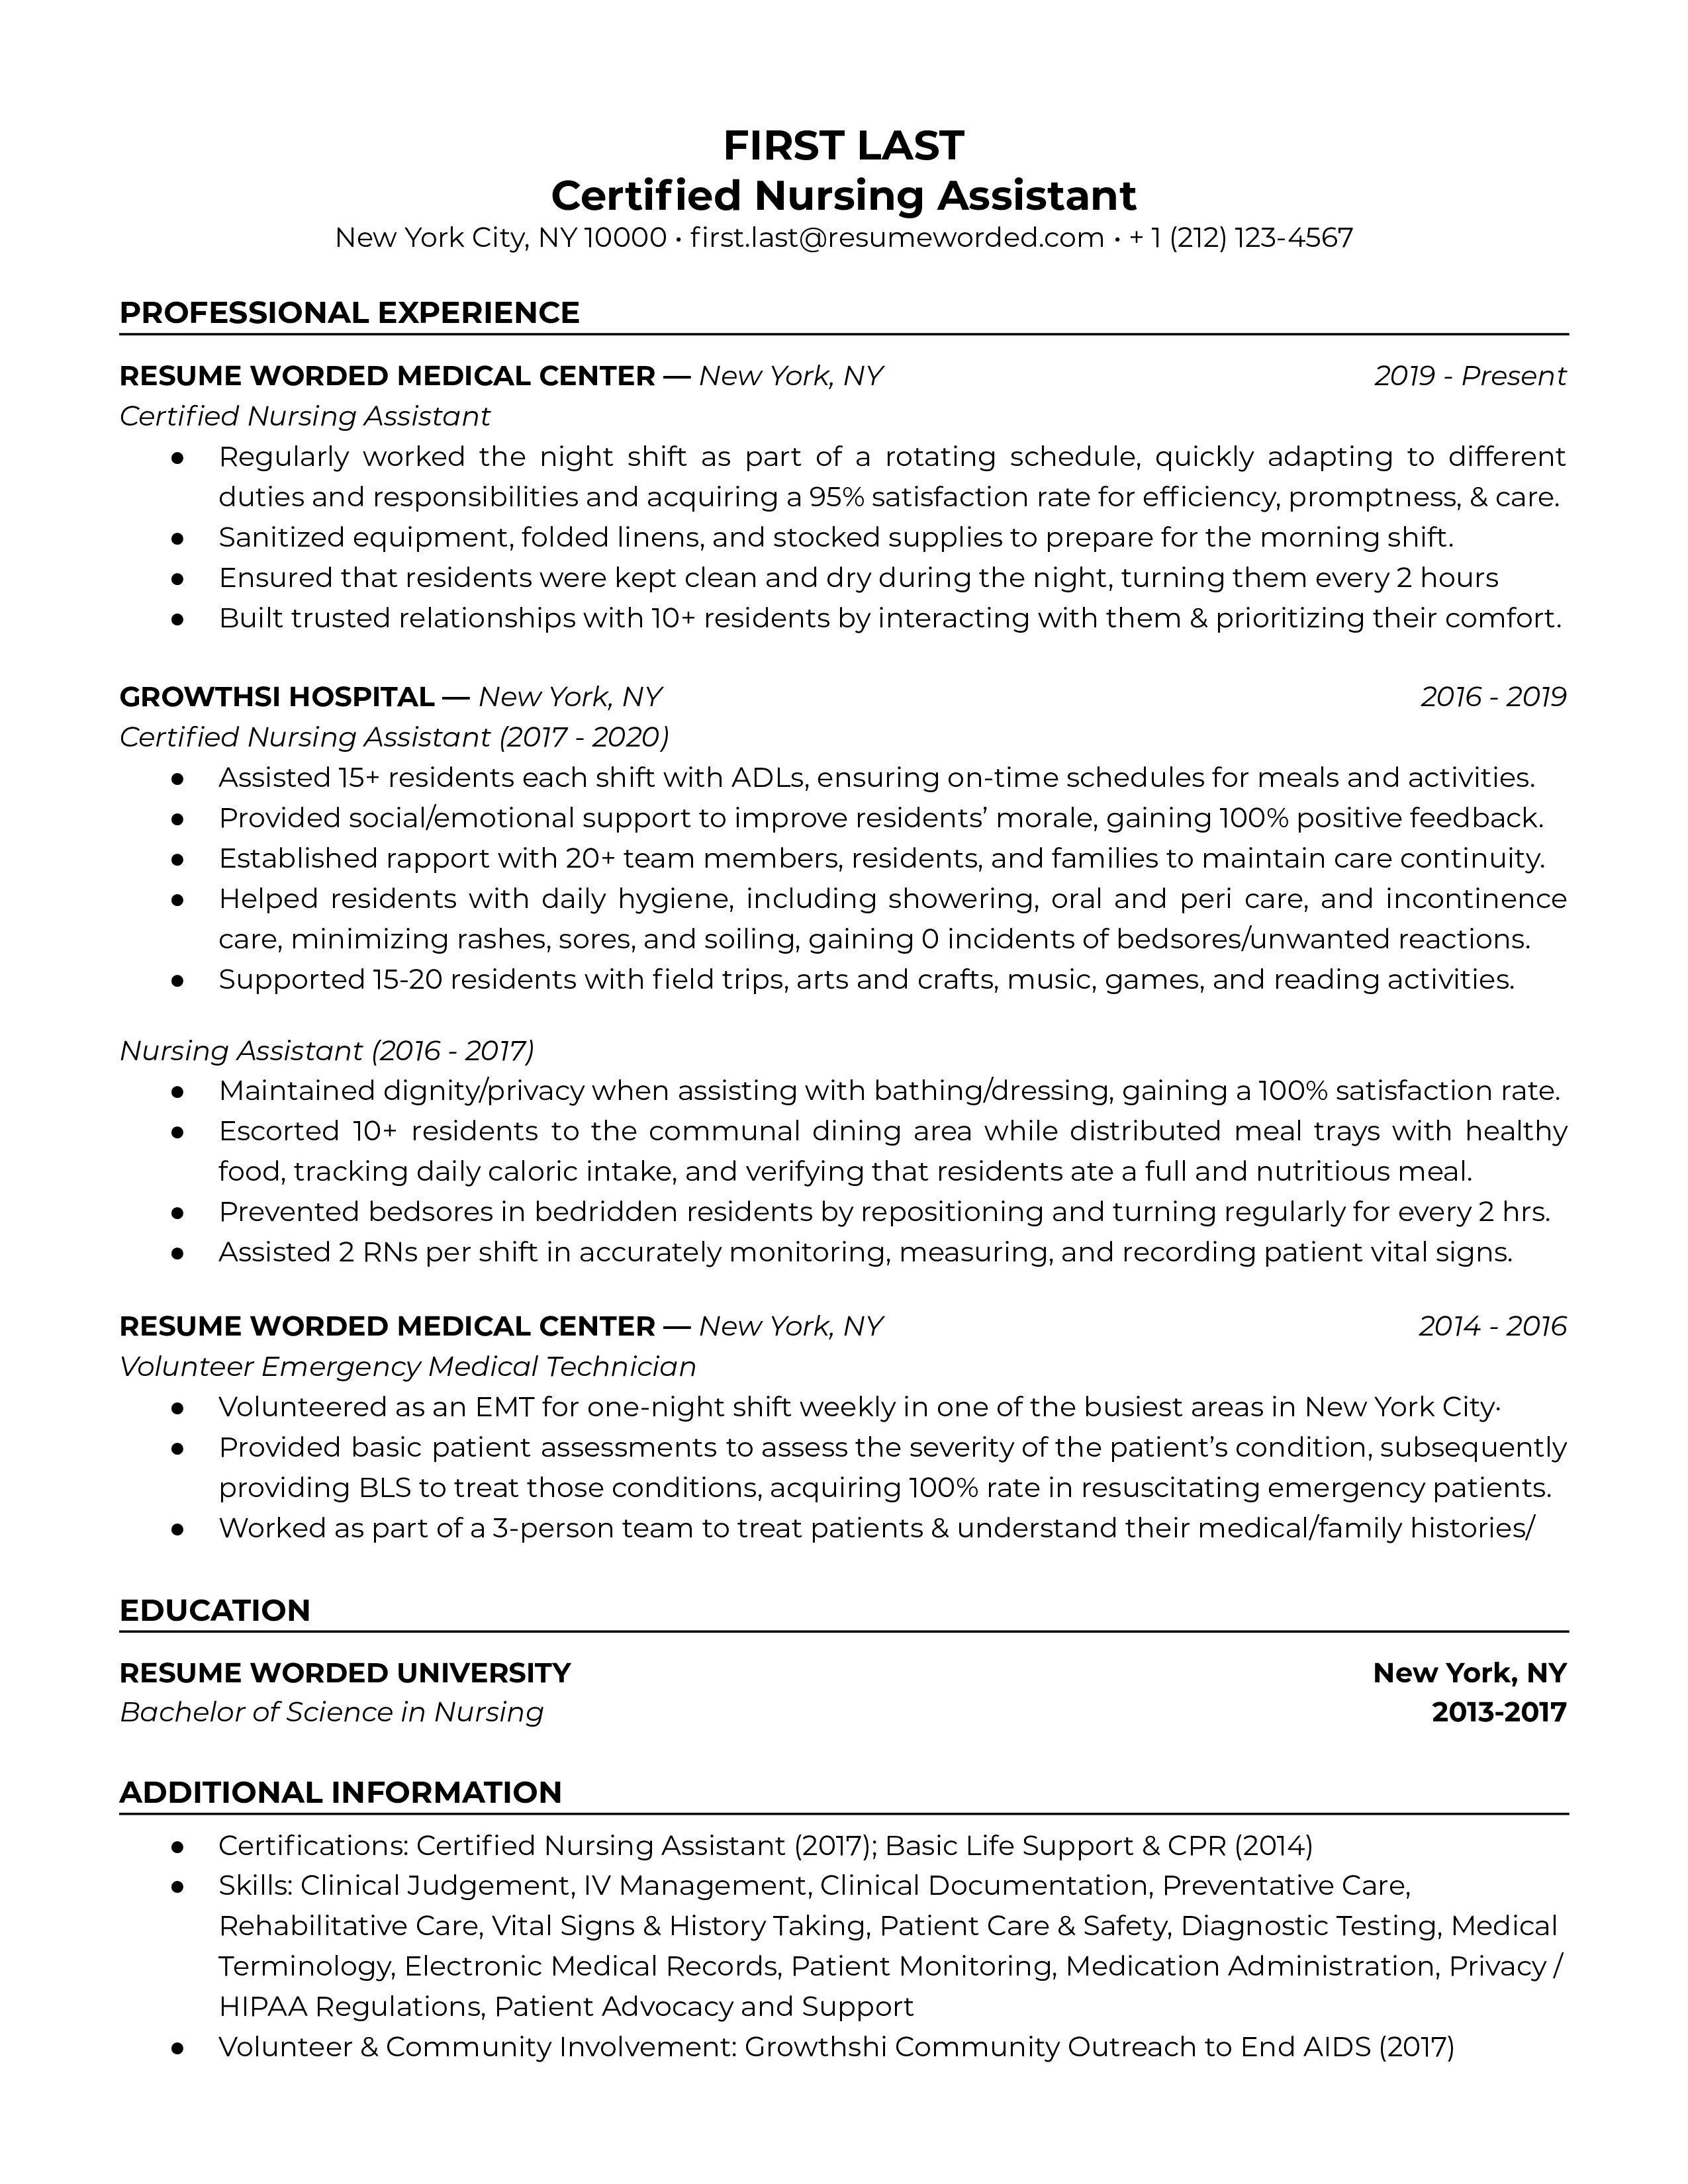 Close-up of a well-structured CV specifically tailored for a Certified Nursing Assistant role.